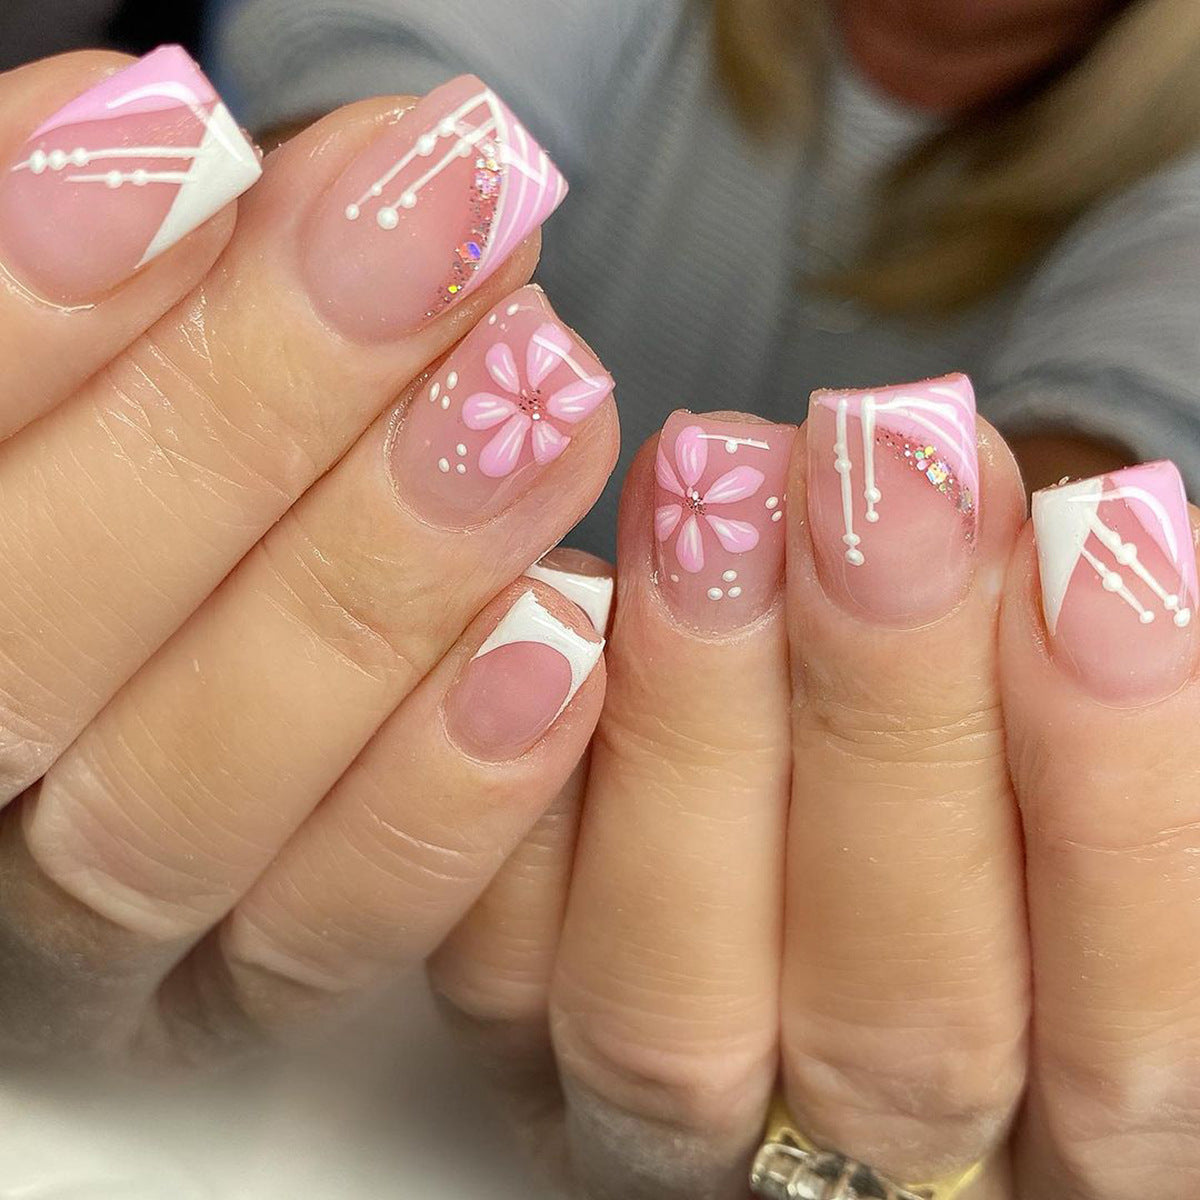 Larger Than Life Medium Square Pink Everyday Press On Nails